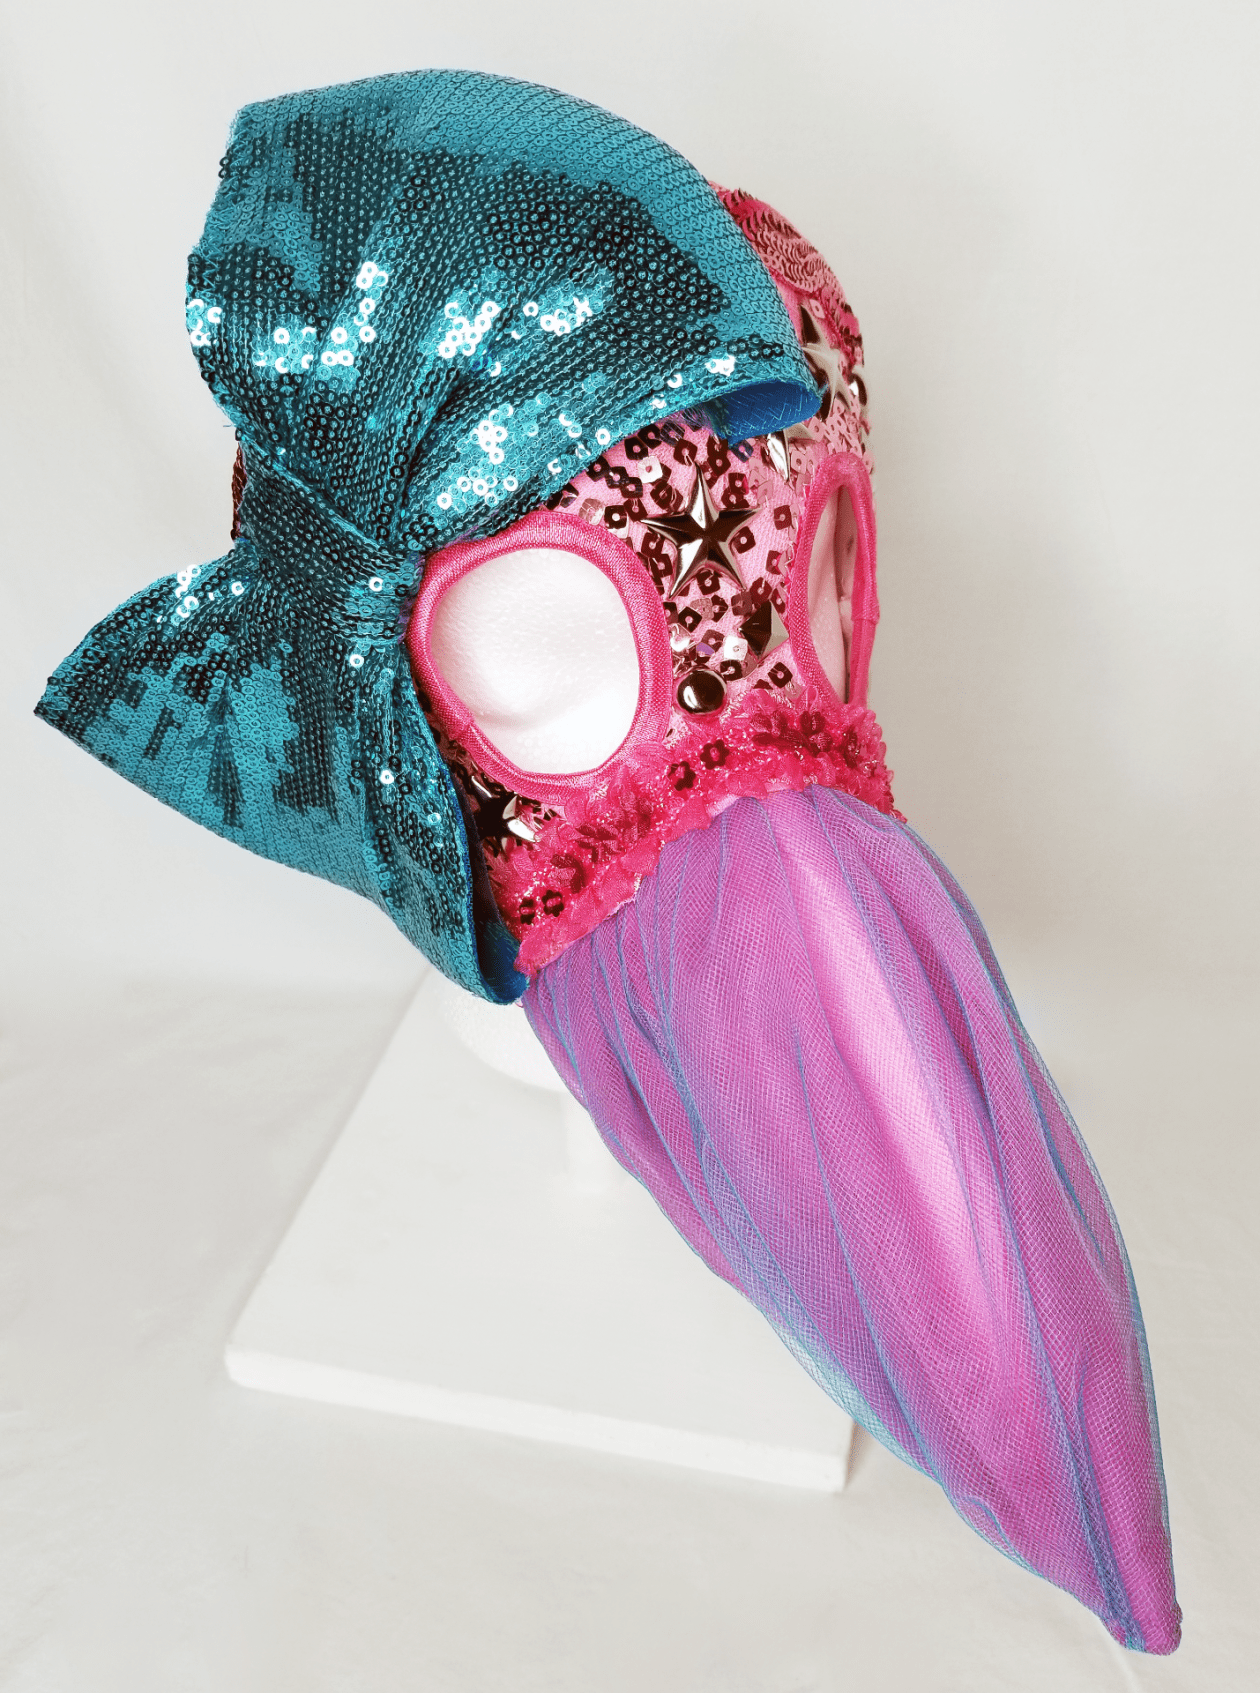 A pink beaked mask with a blue sequin bow